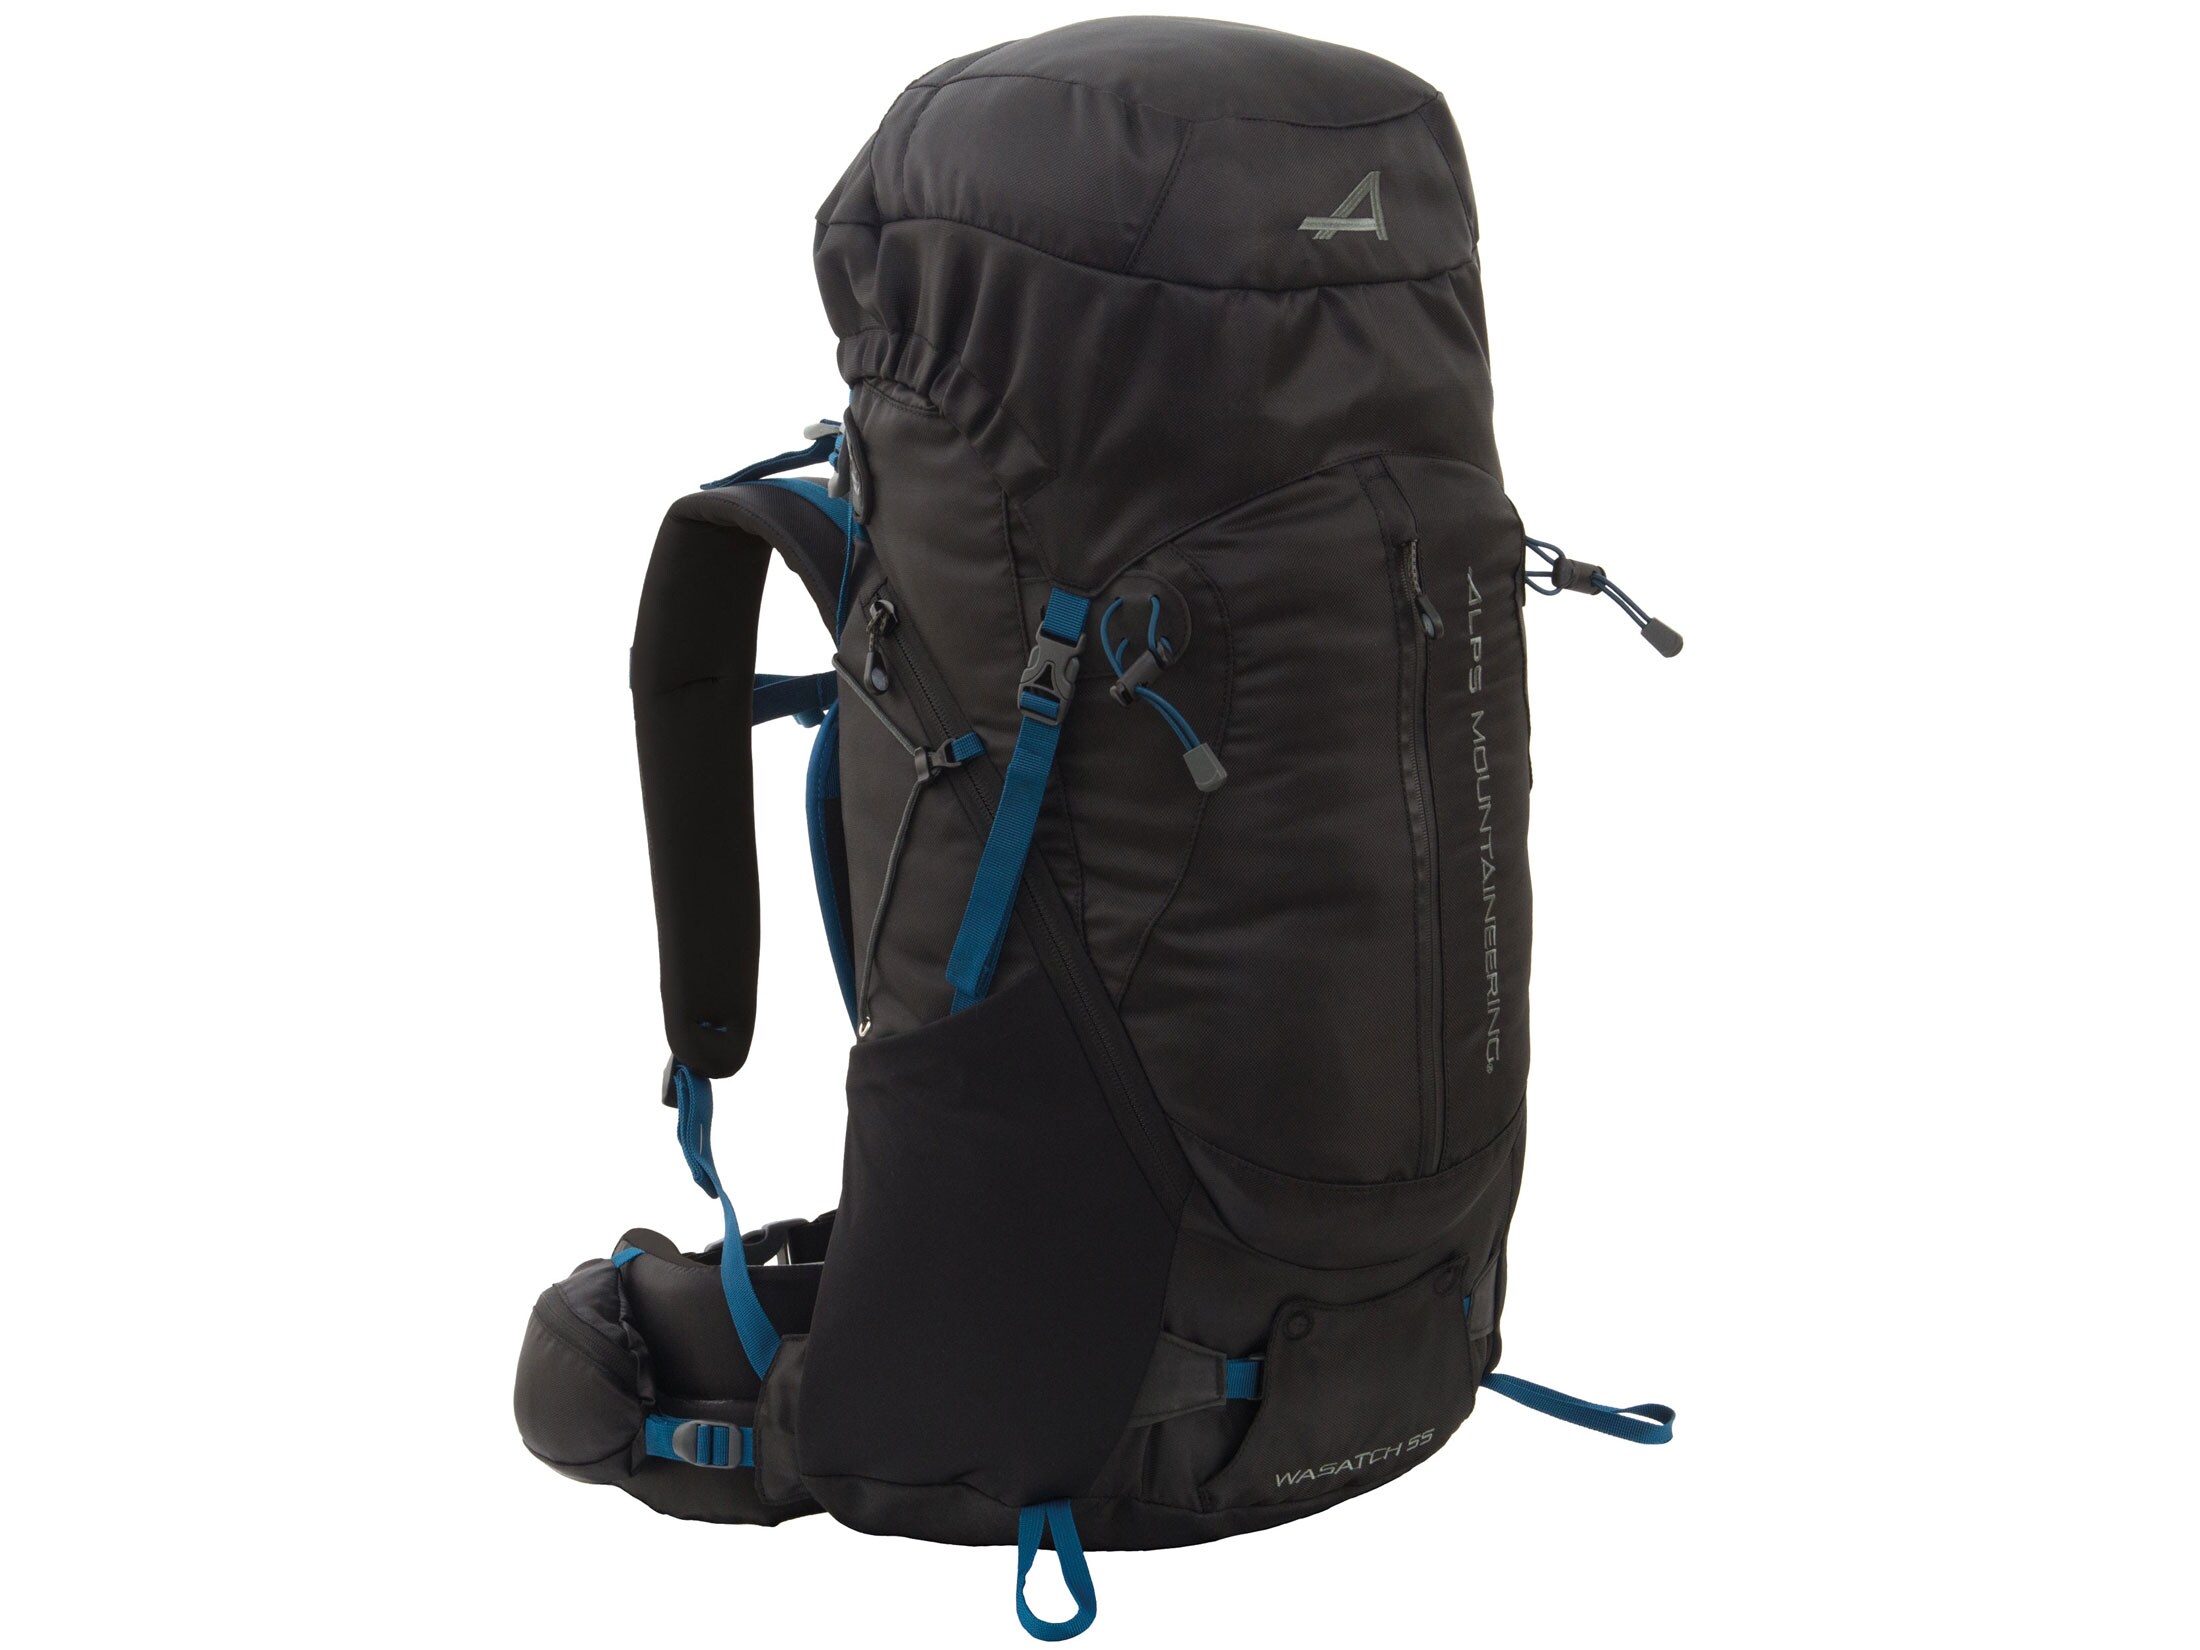 ALPS Mountaineering Wasatch 55 Backpack Black